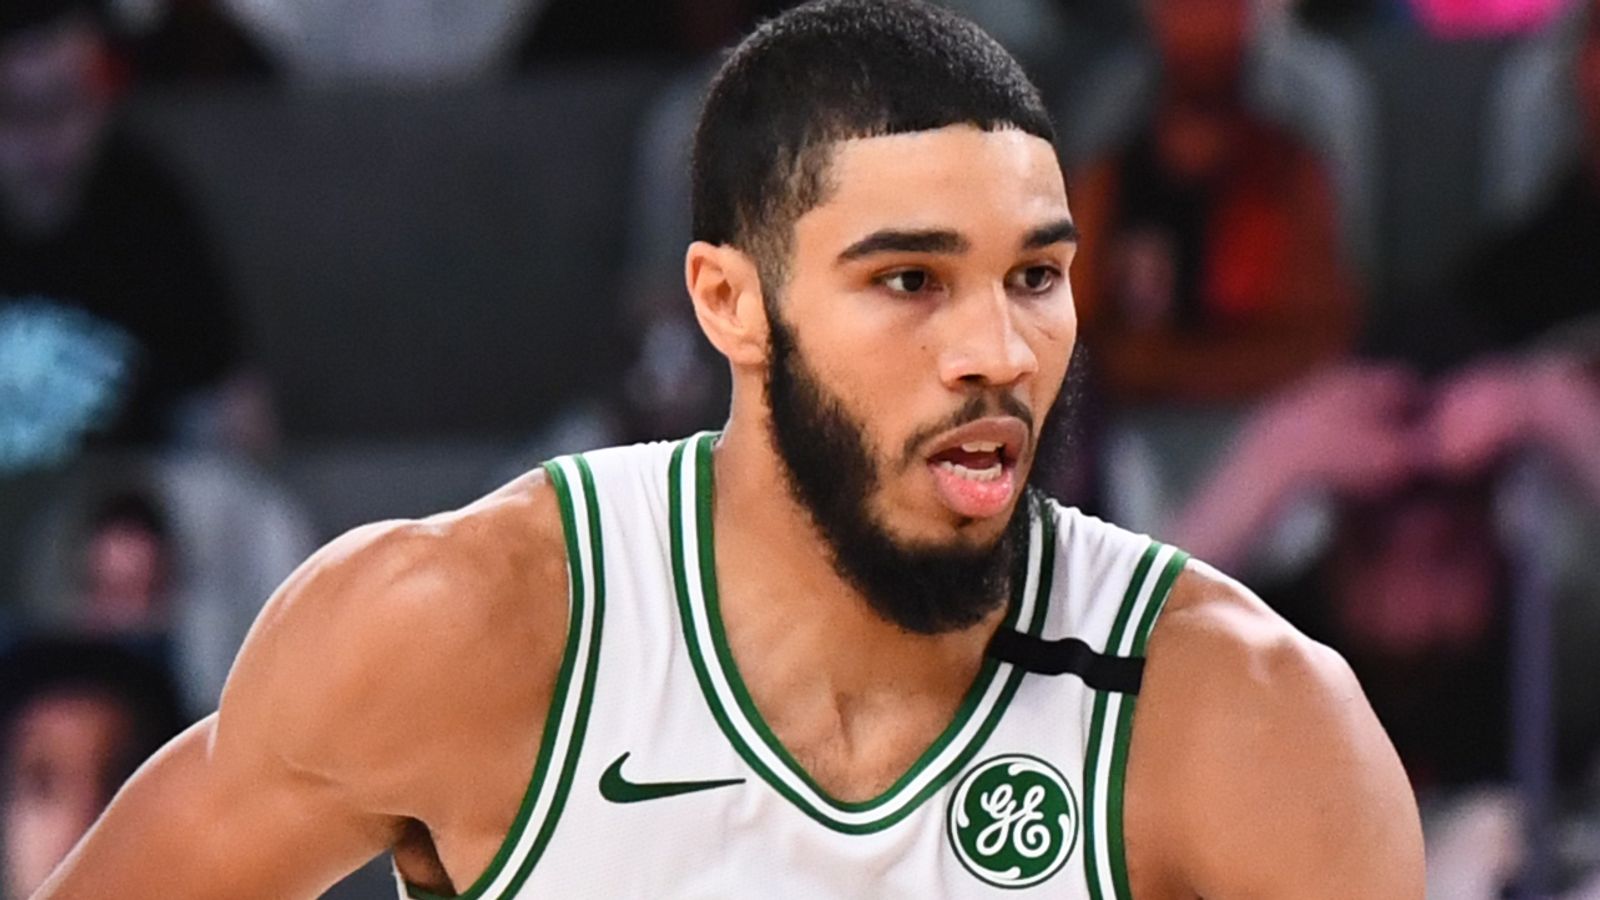 25-under-25: Jayson Tatum is looking to take the Celtics even further